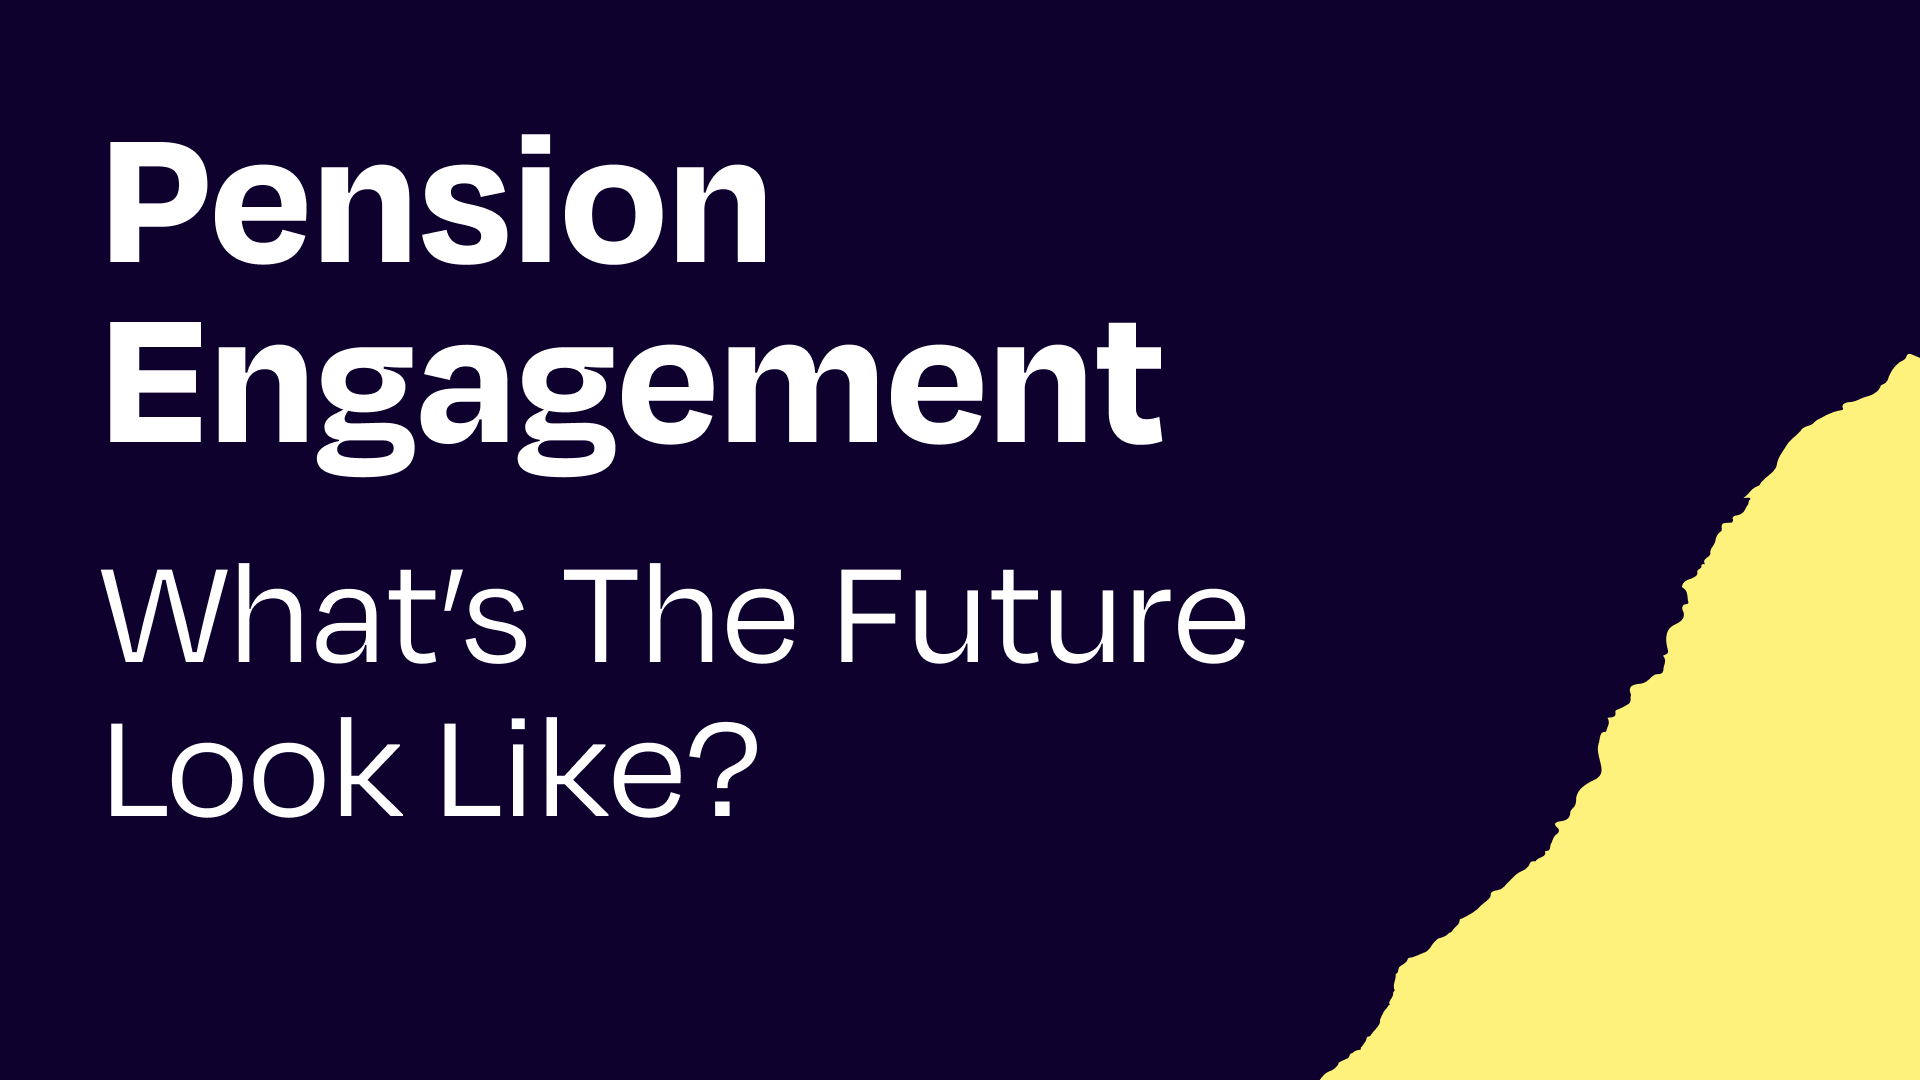 The future of pension engagement